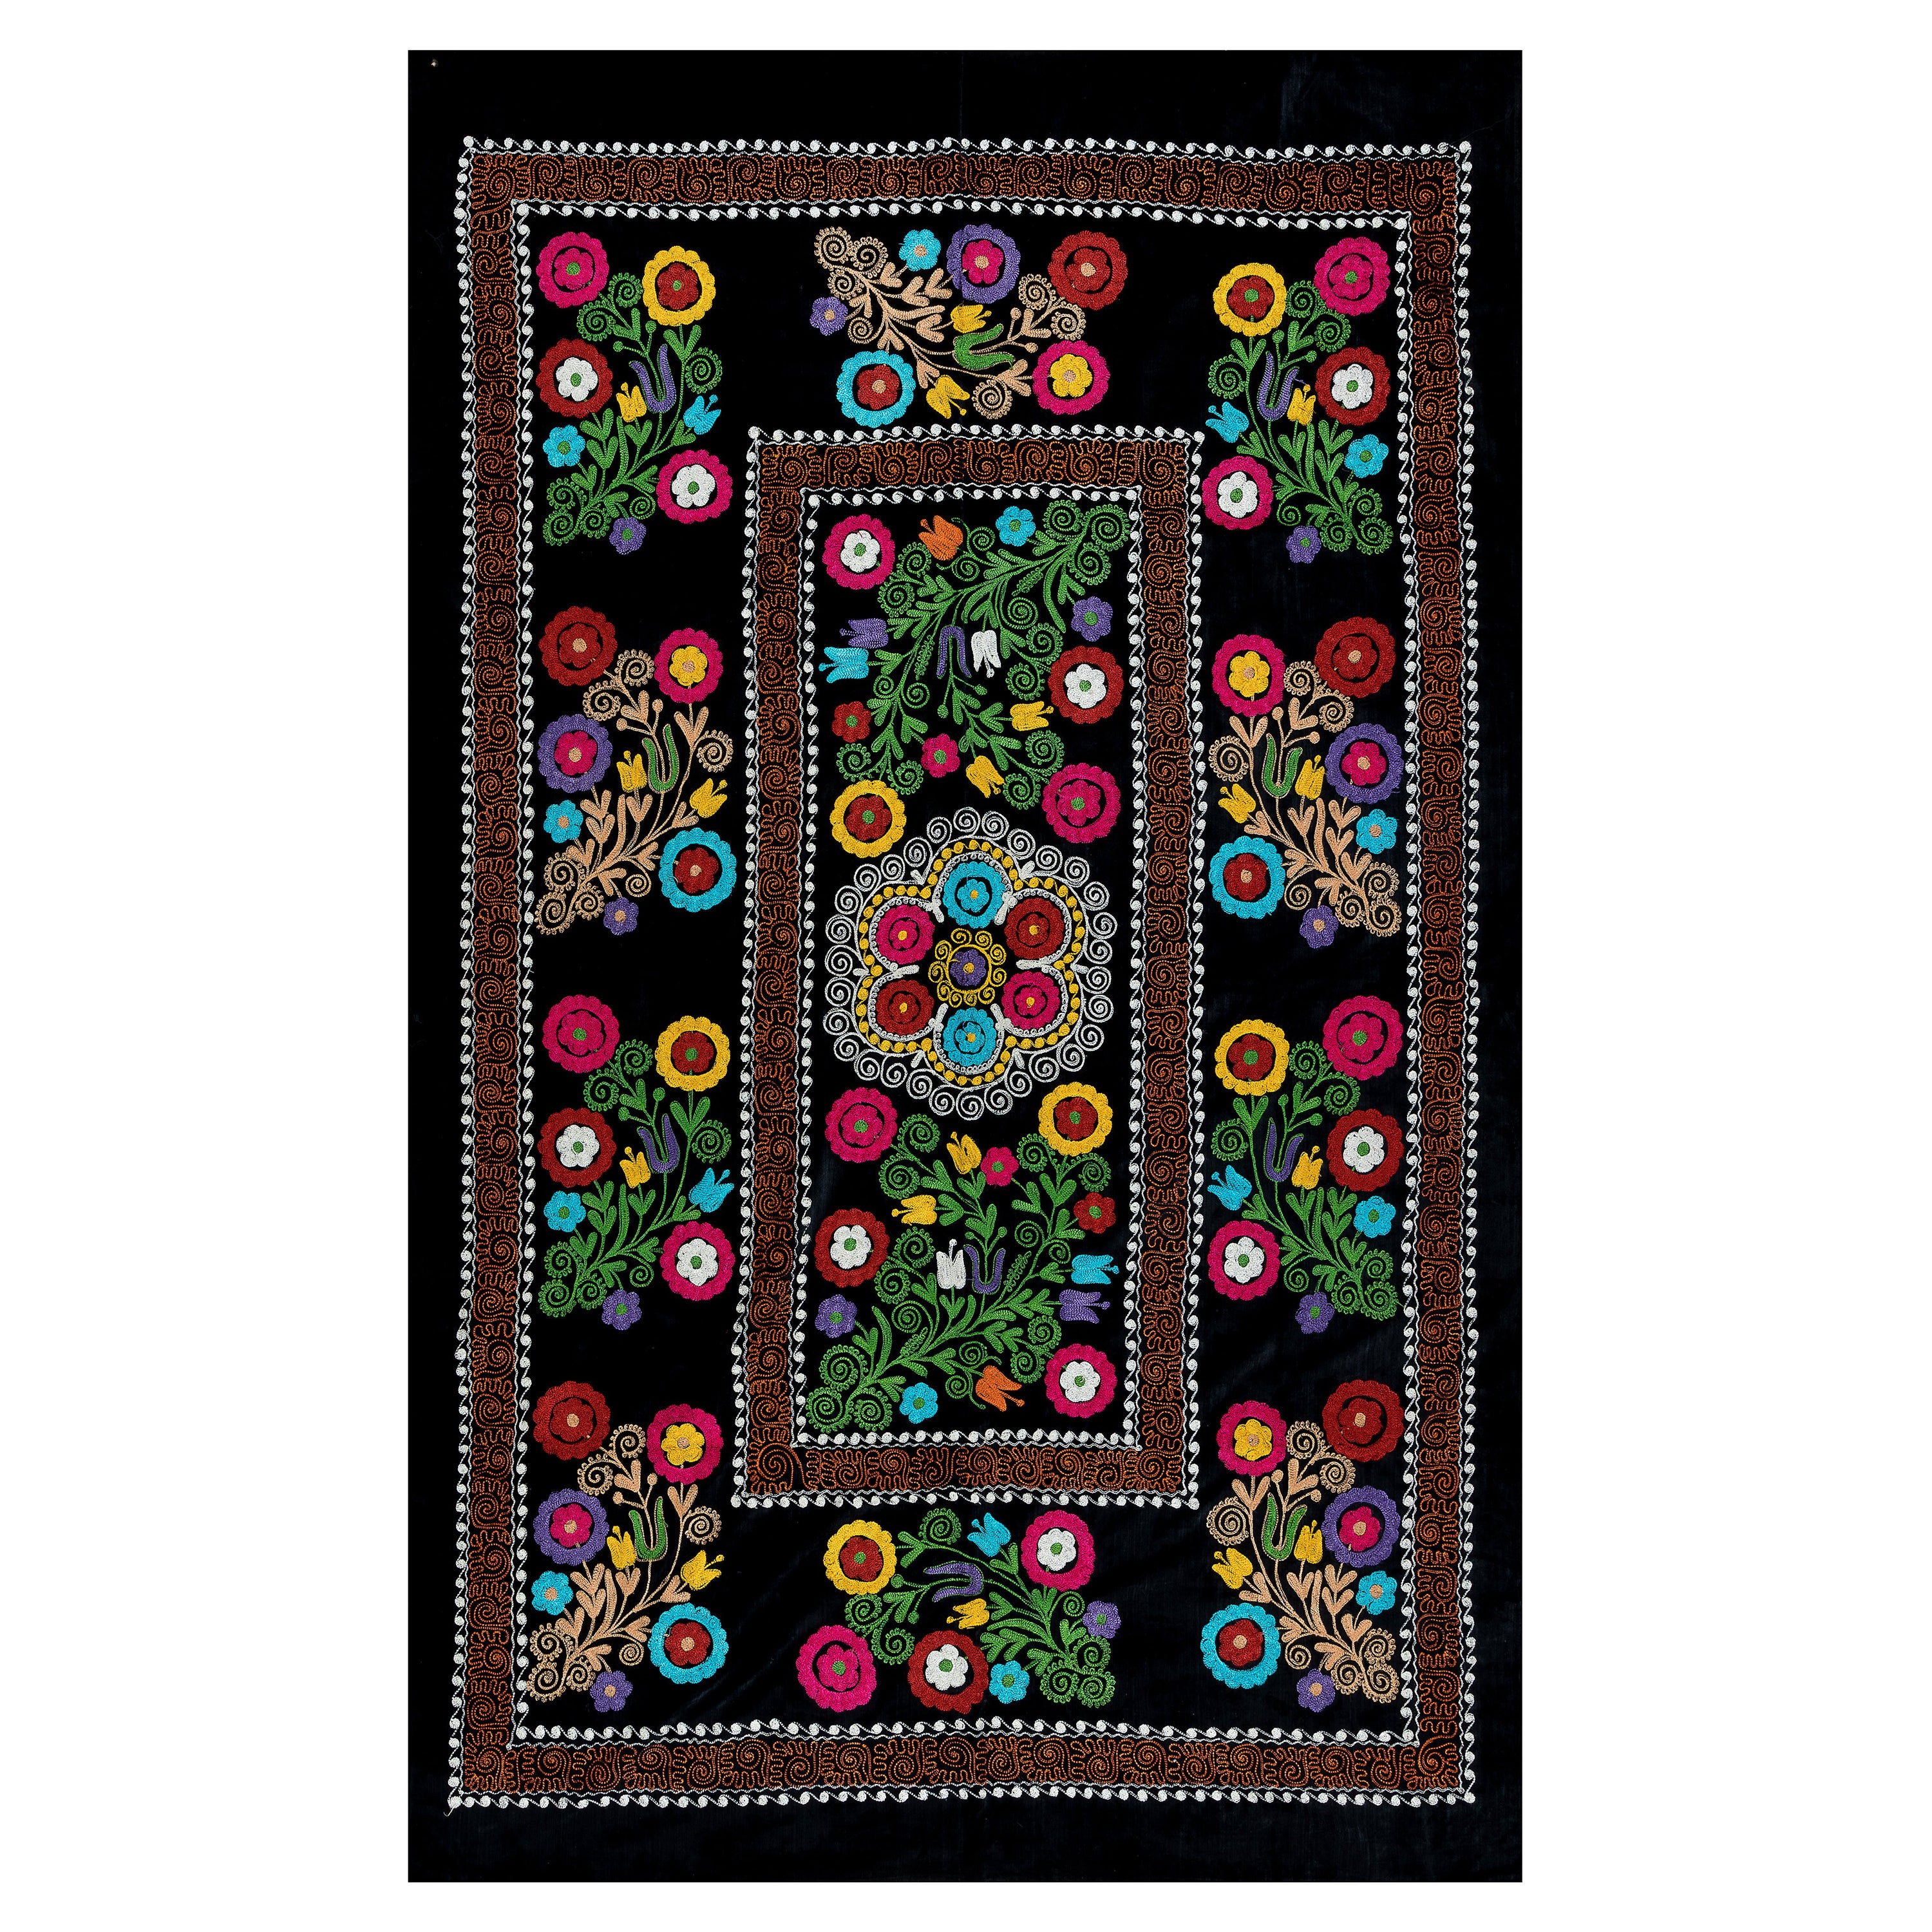 4.3x6.8 Ft Silk Embroidery Bed Cover, Black Wall Hanging, Vintage Suzani Throw